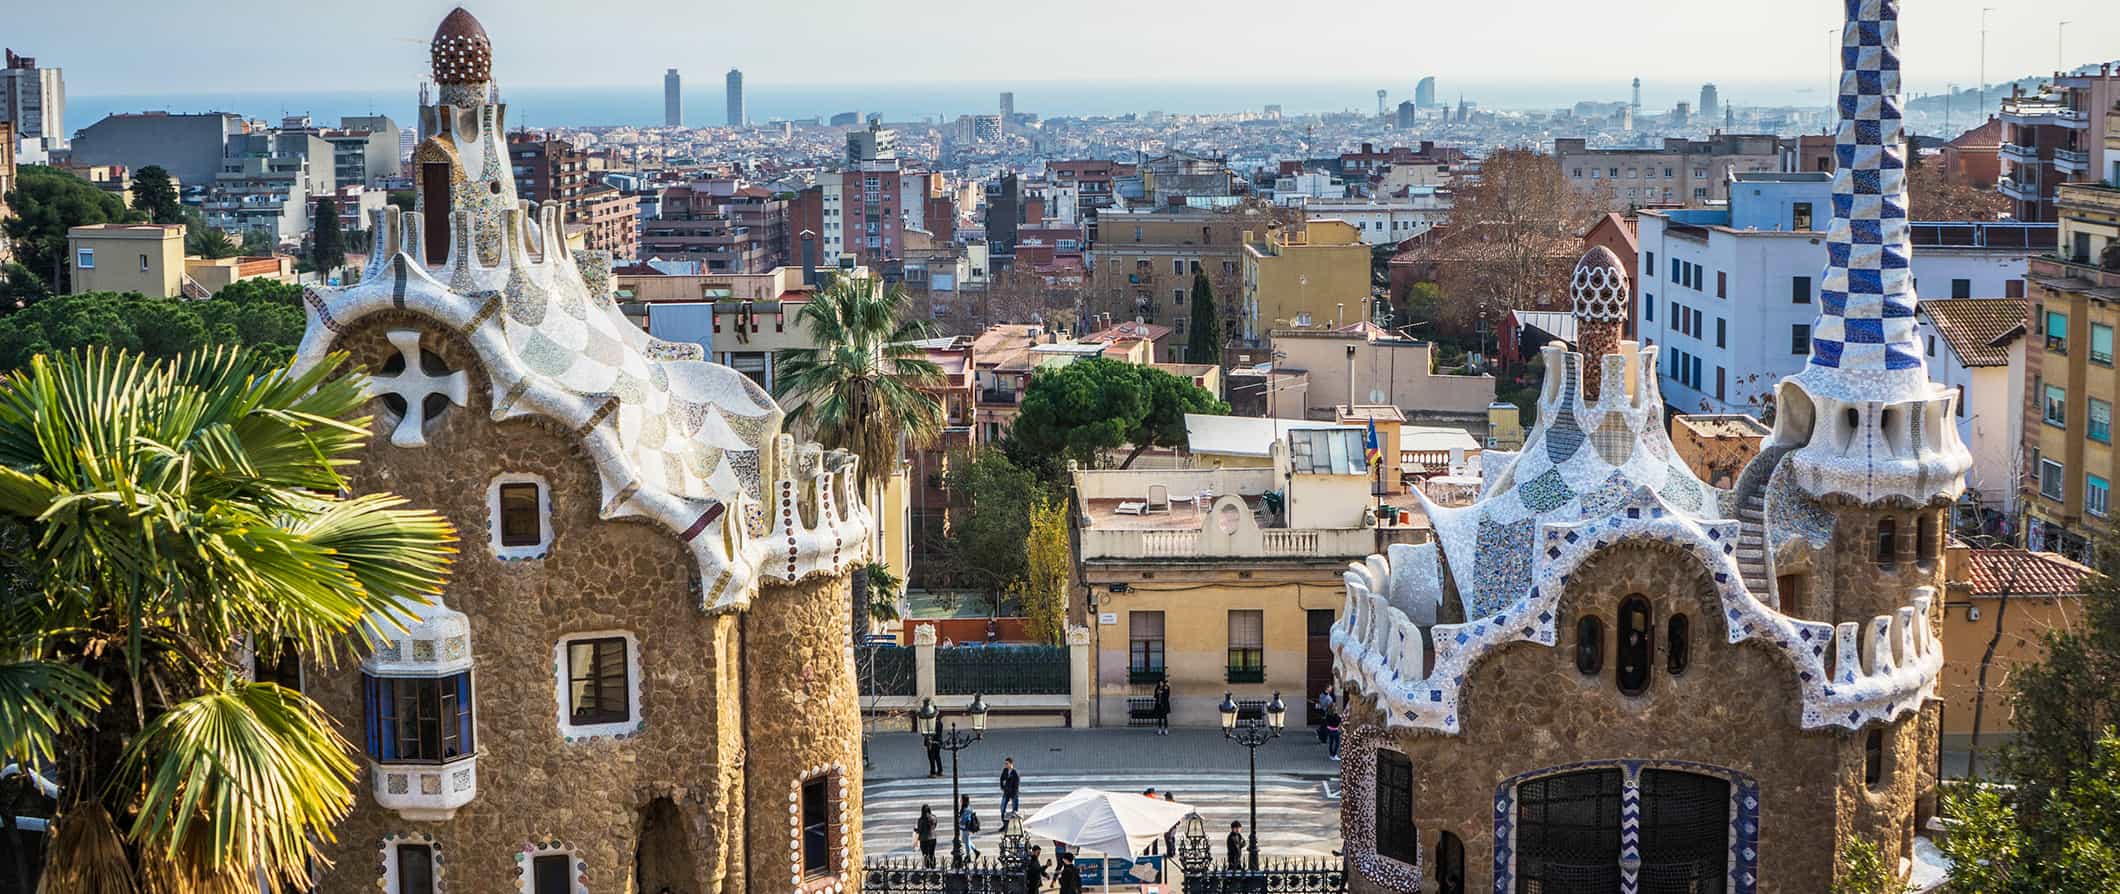 Gaudí architecture with Barcelona's skyline in the background